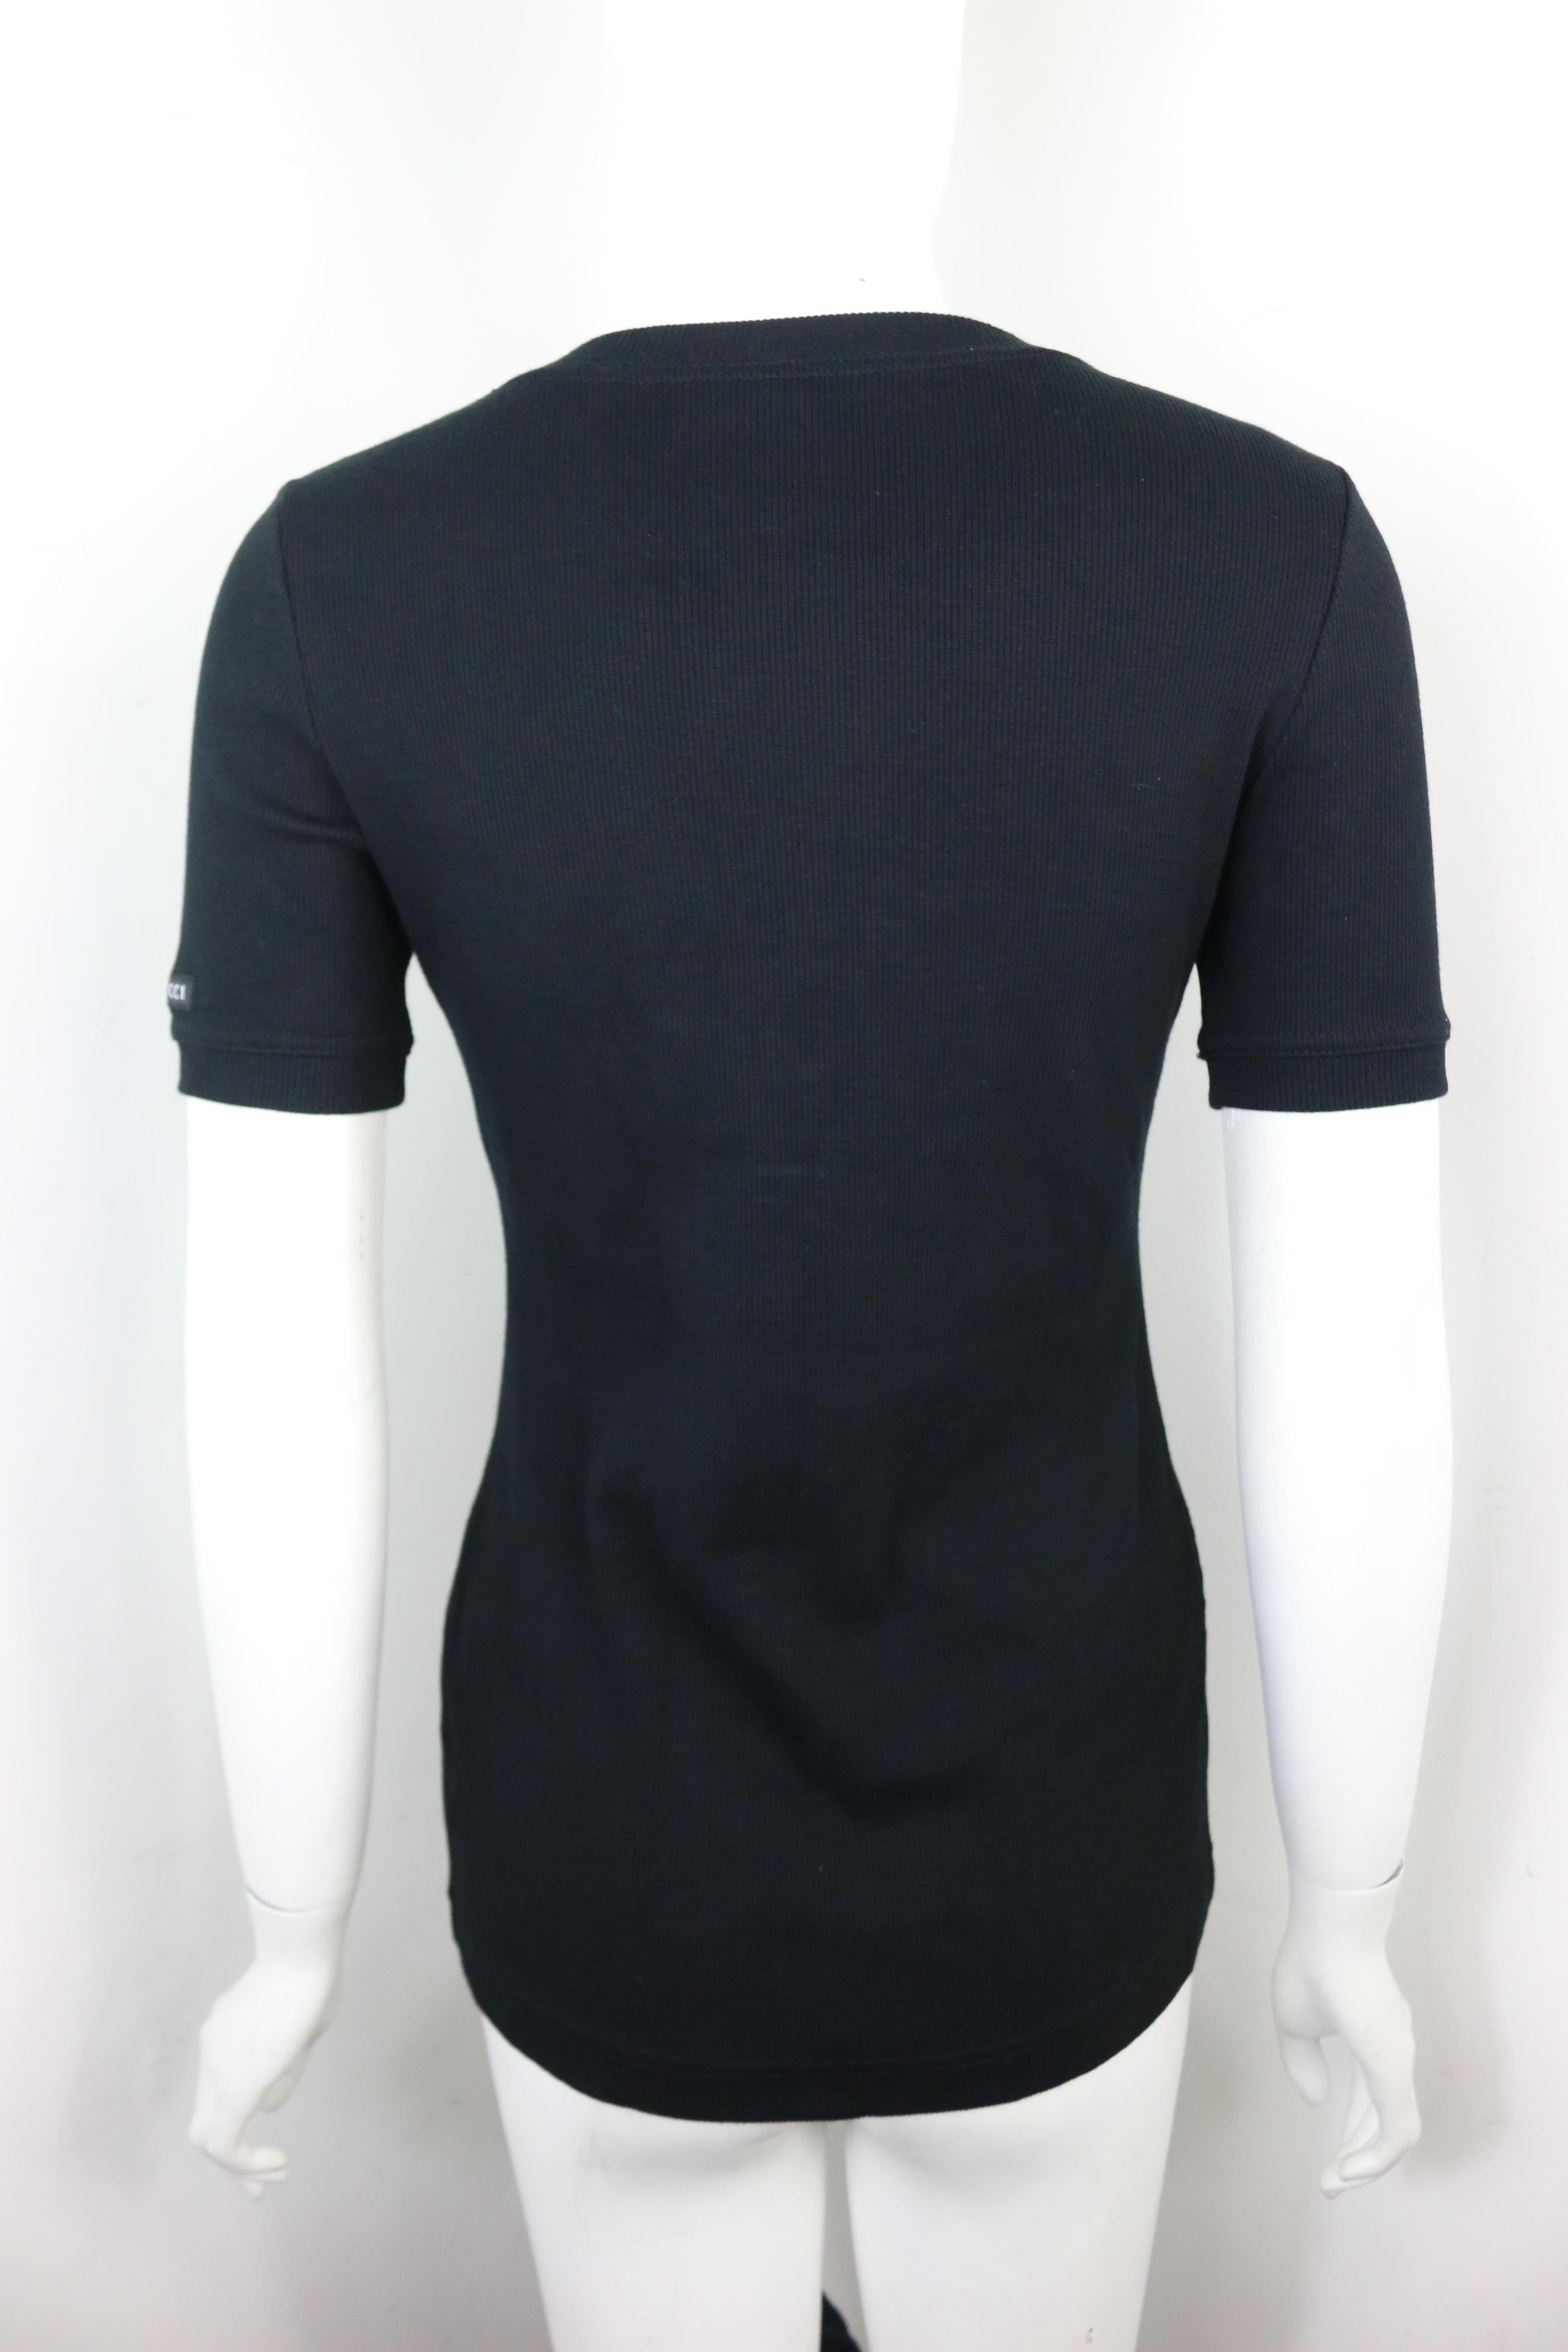 Tom Ford For Gucci Thick Cotton Black Short Sleeves Top  For Sale 1